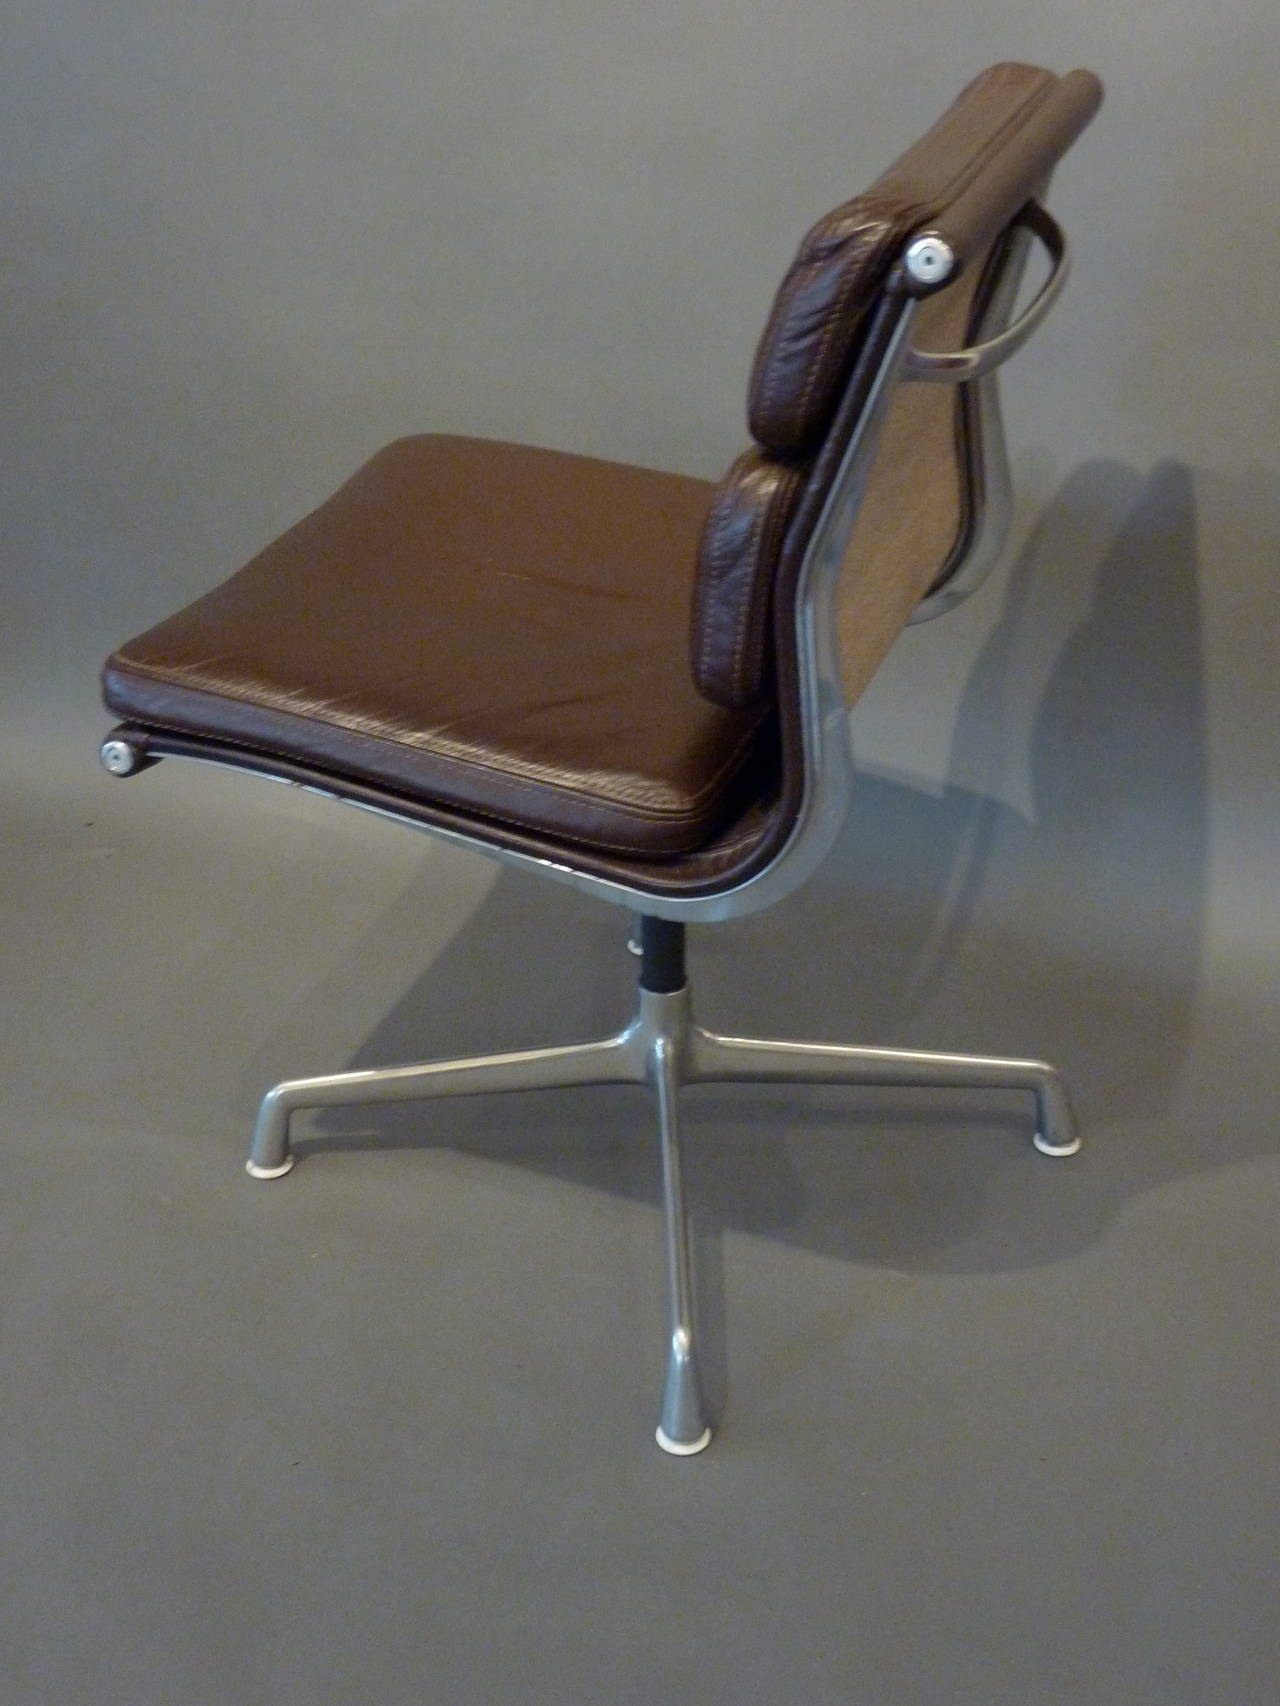 A 20th century Modern desk chair. Made of chrome with brown leather on a chrome swivel base. Extremely comfortable, designed by Herman Miller, 1977.